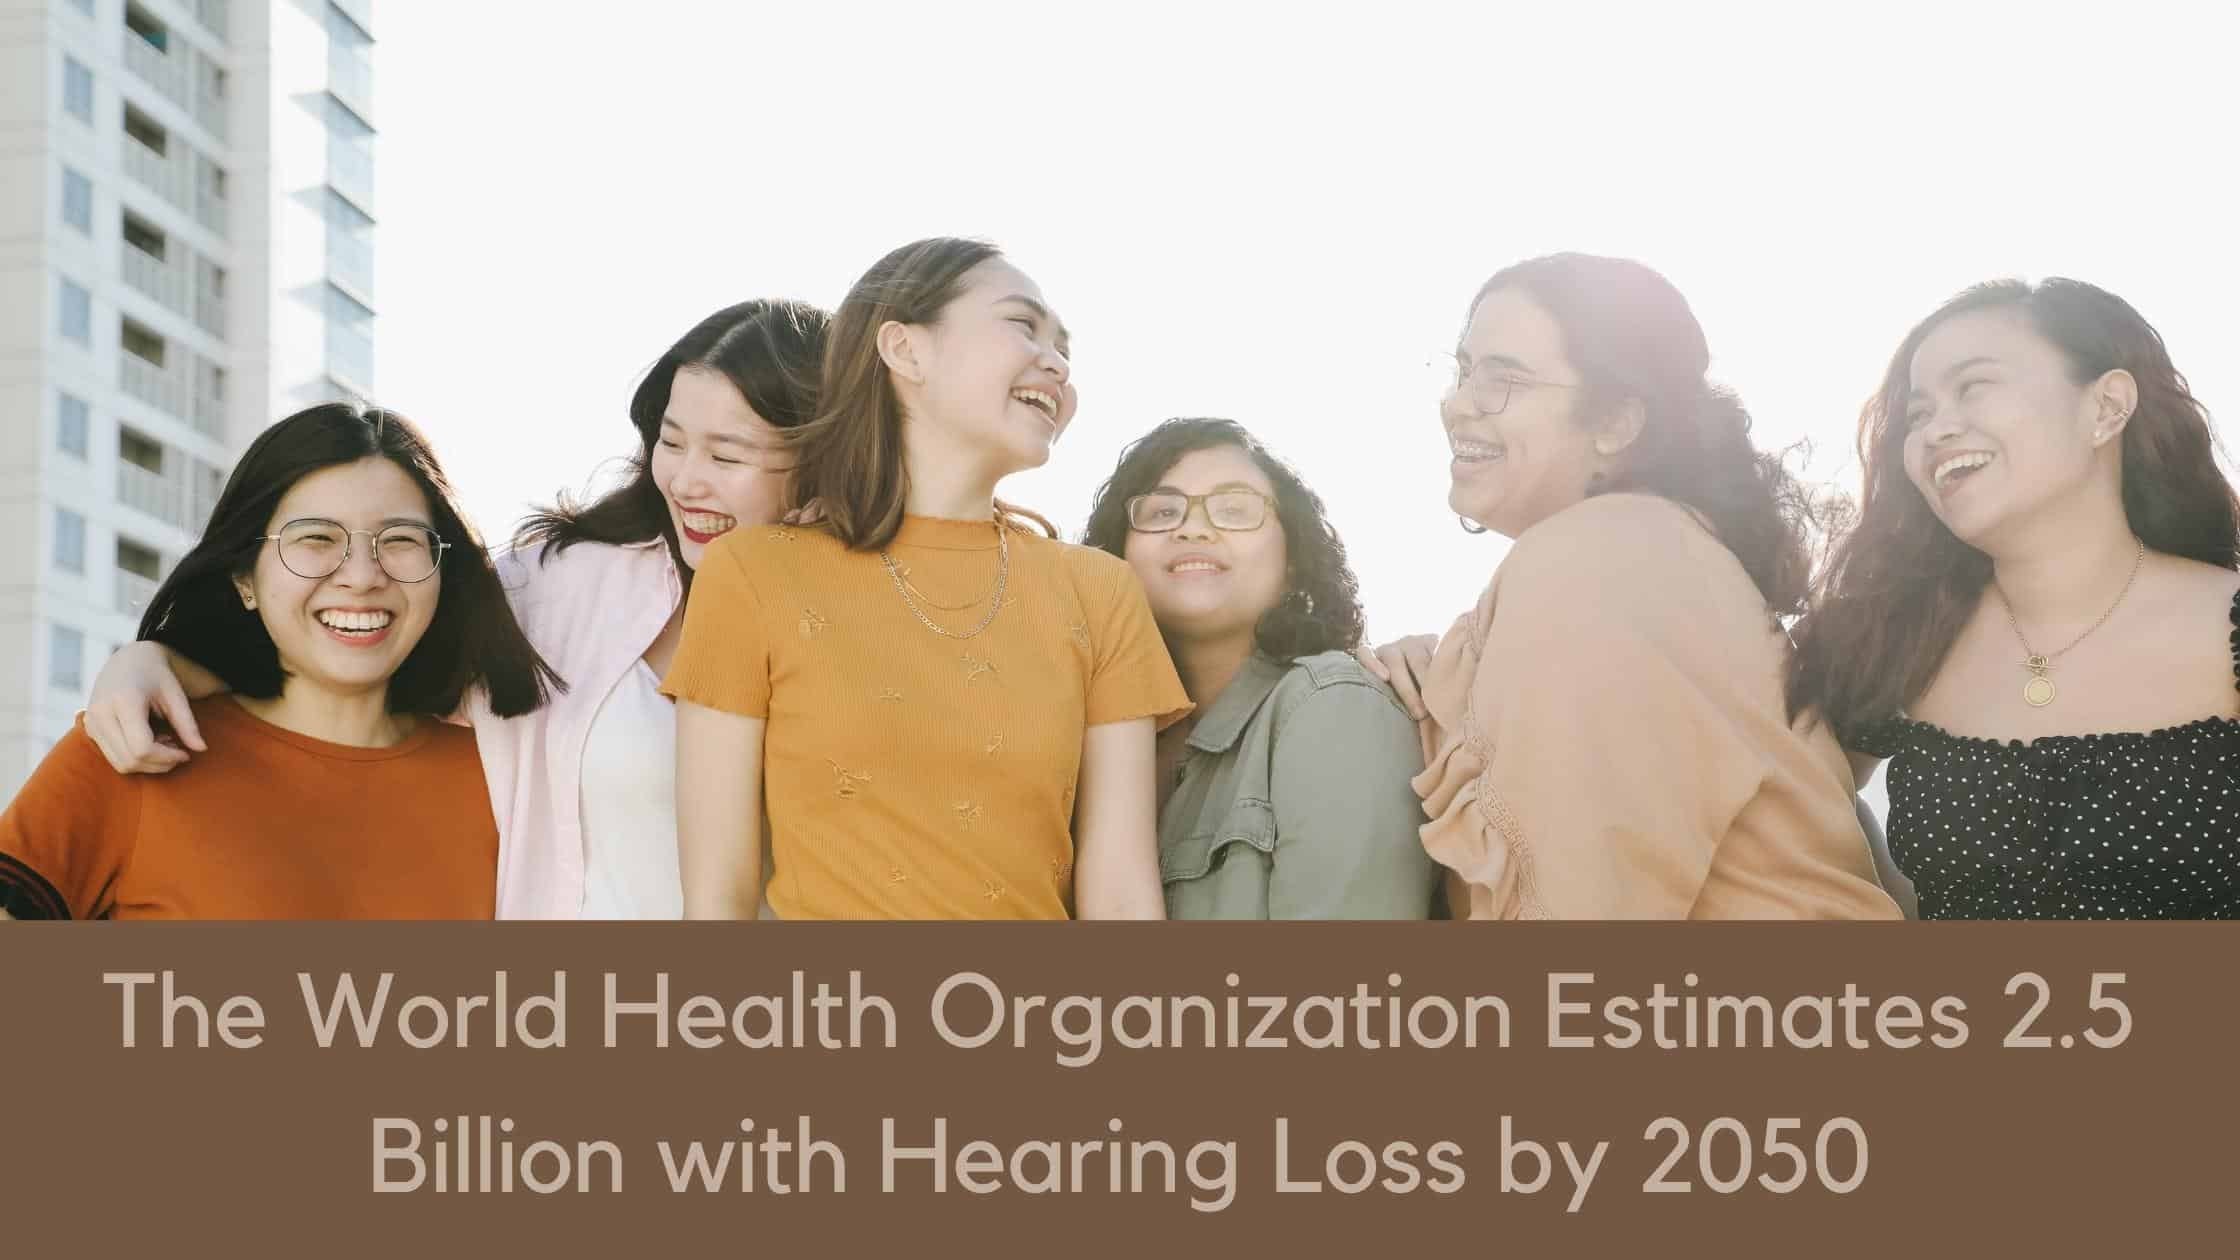 Featured image for “The World Health Organization Estimates 2.5 Billion with Hearing Loss by 2050”